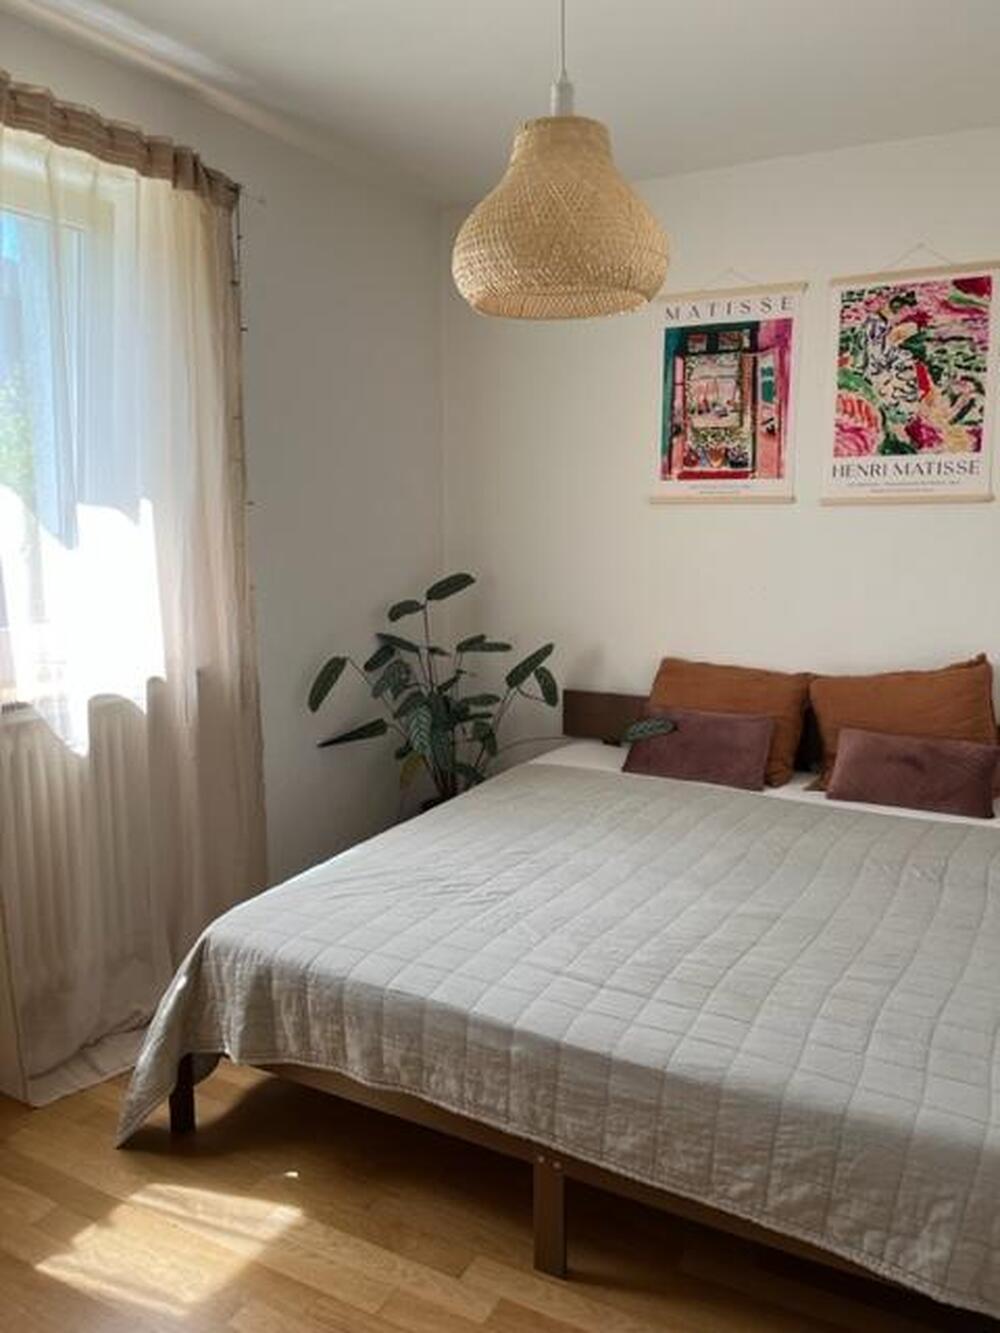 2 Bed flat to sublet for 2-3 months, from July 1-7 thin...